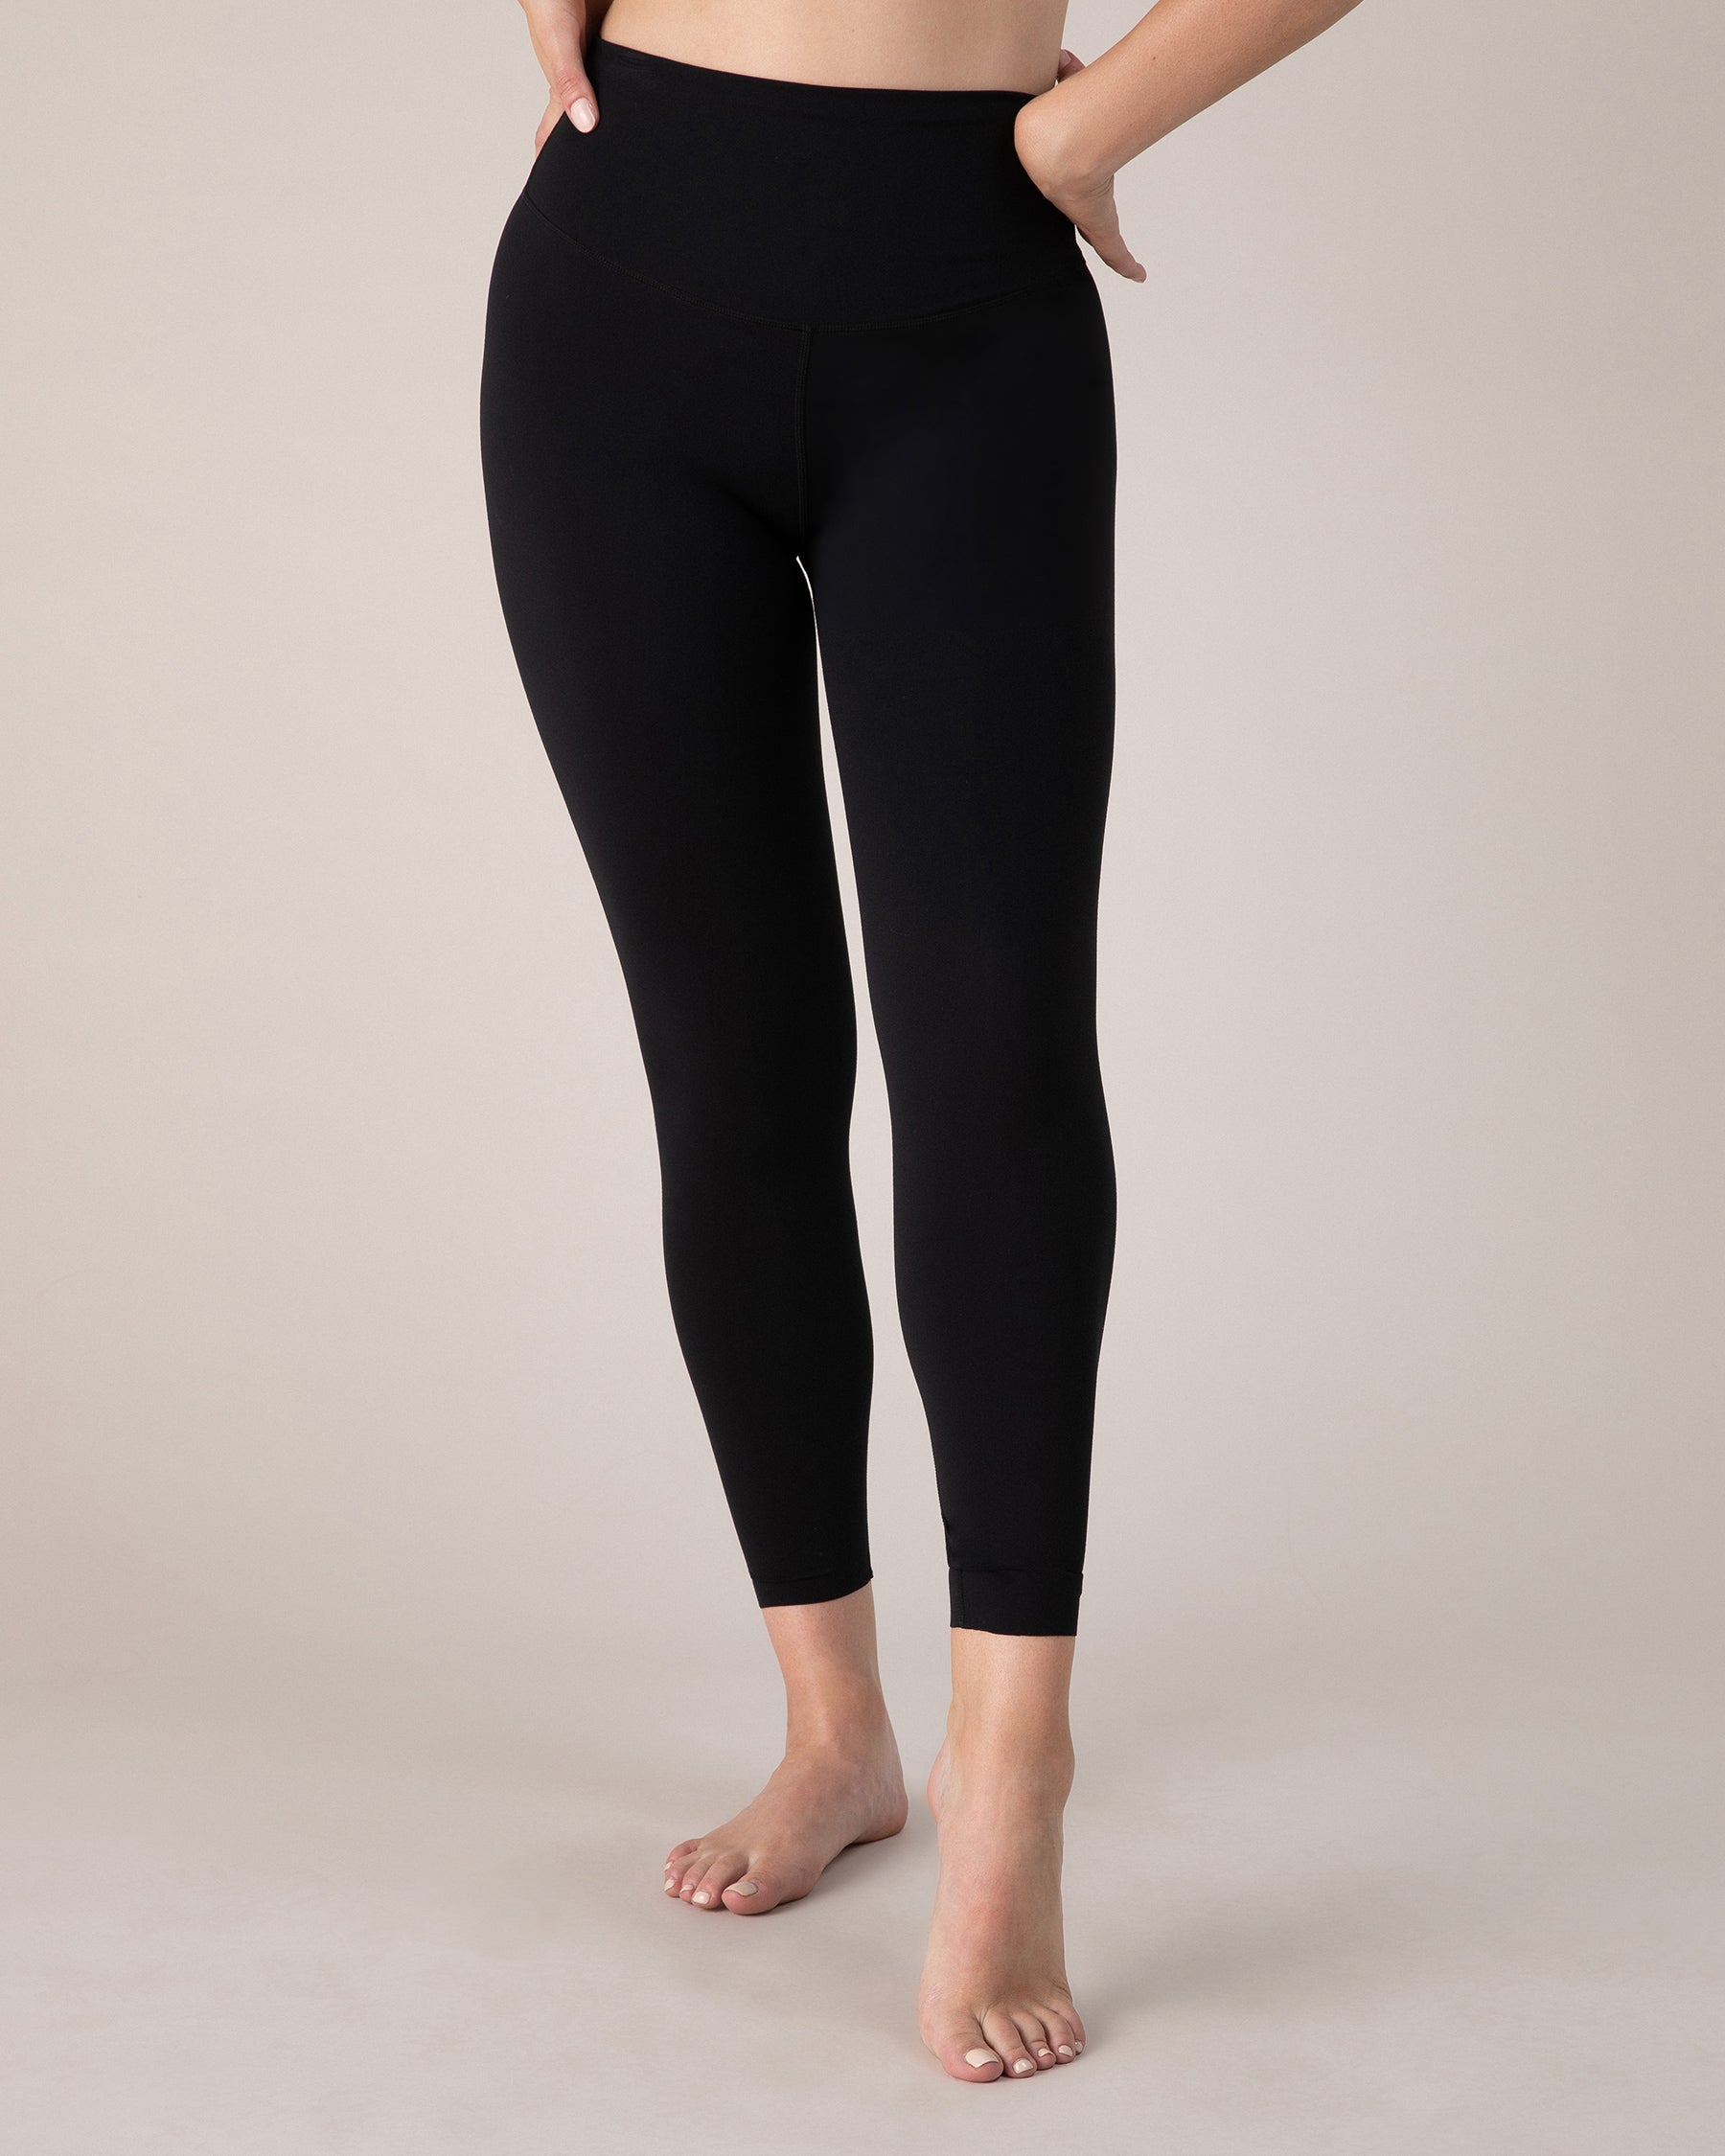 BLOCHeverhold™ 7/8 High-Waisted Leggings in Dianthus